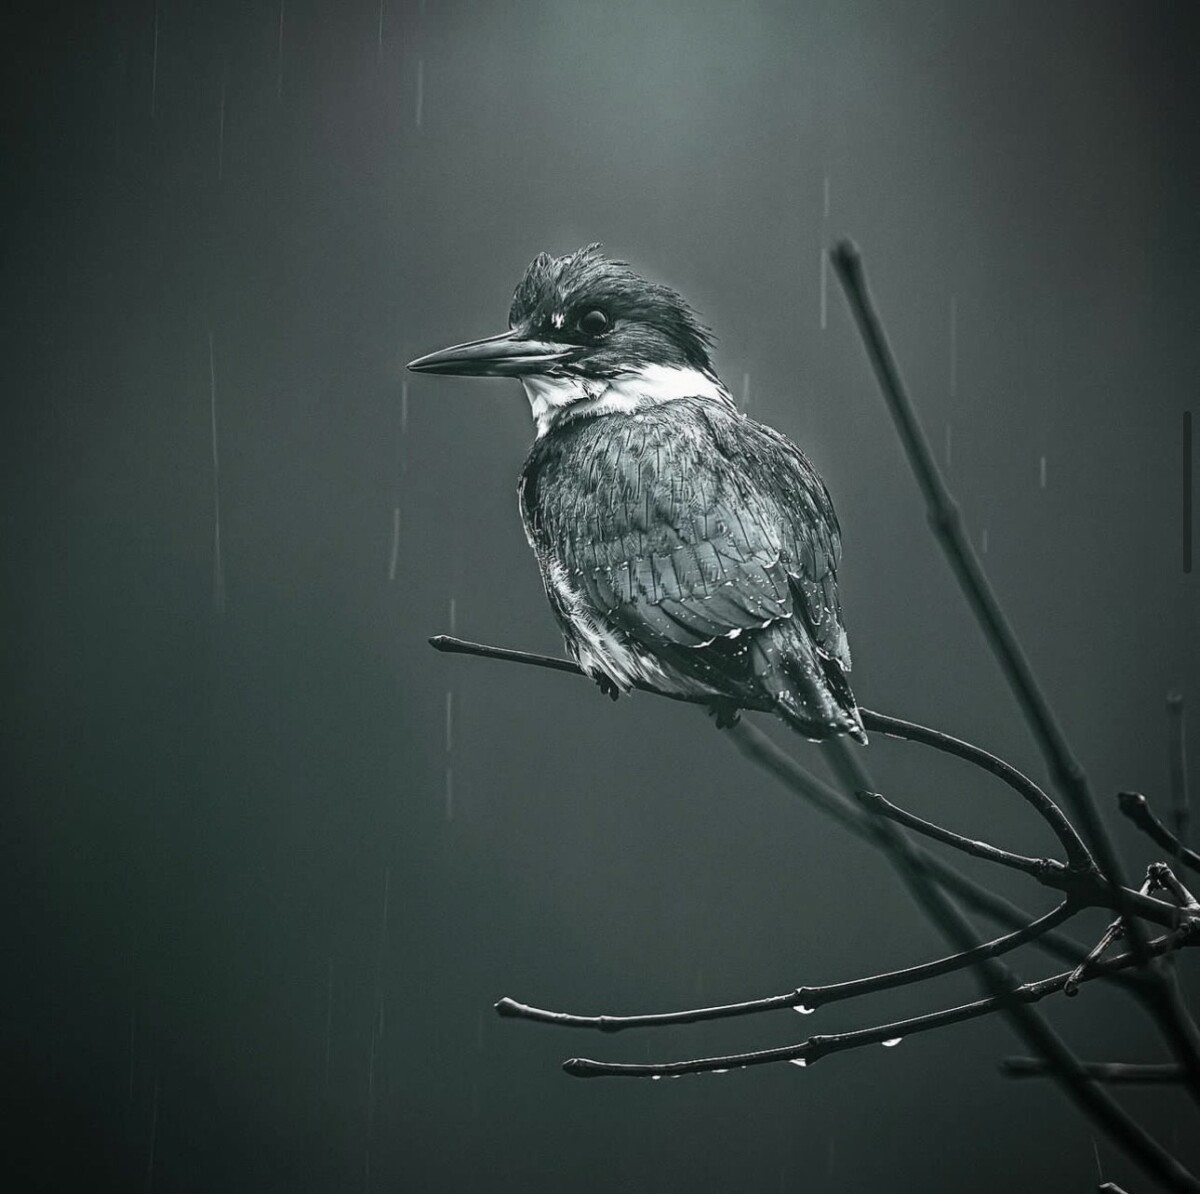 1st Place – Kingfisher in the rain by Erik Long